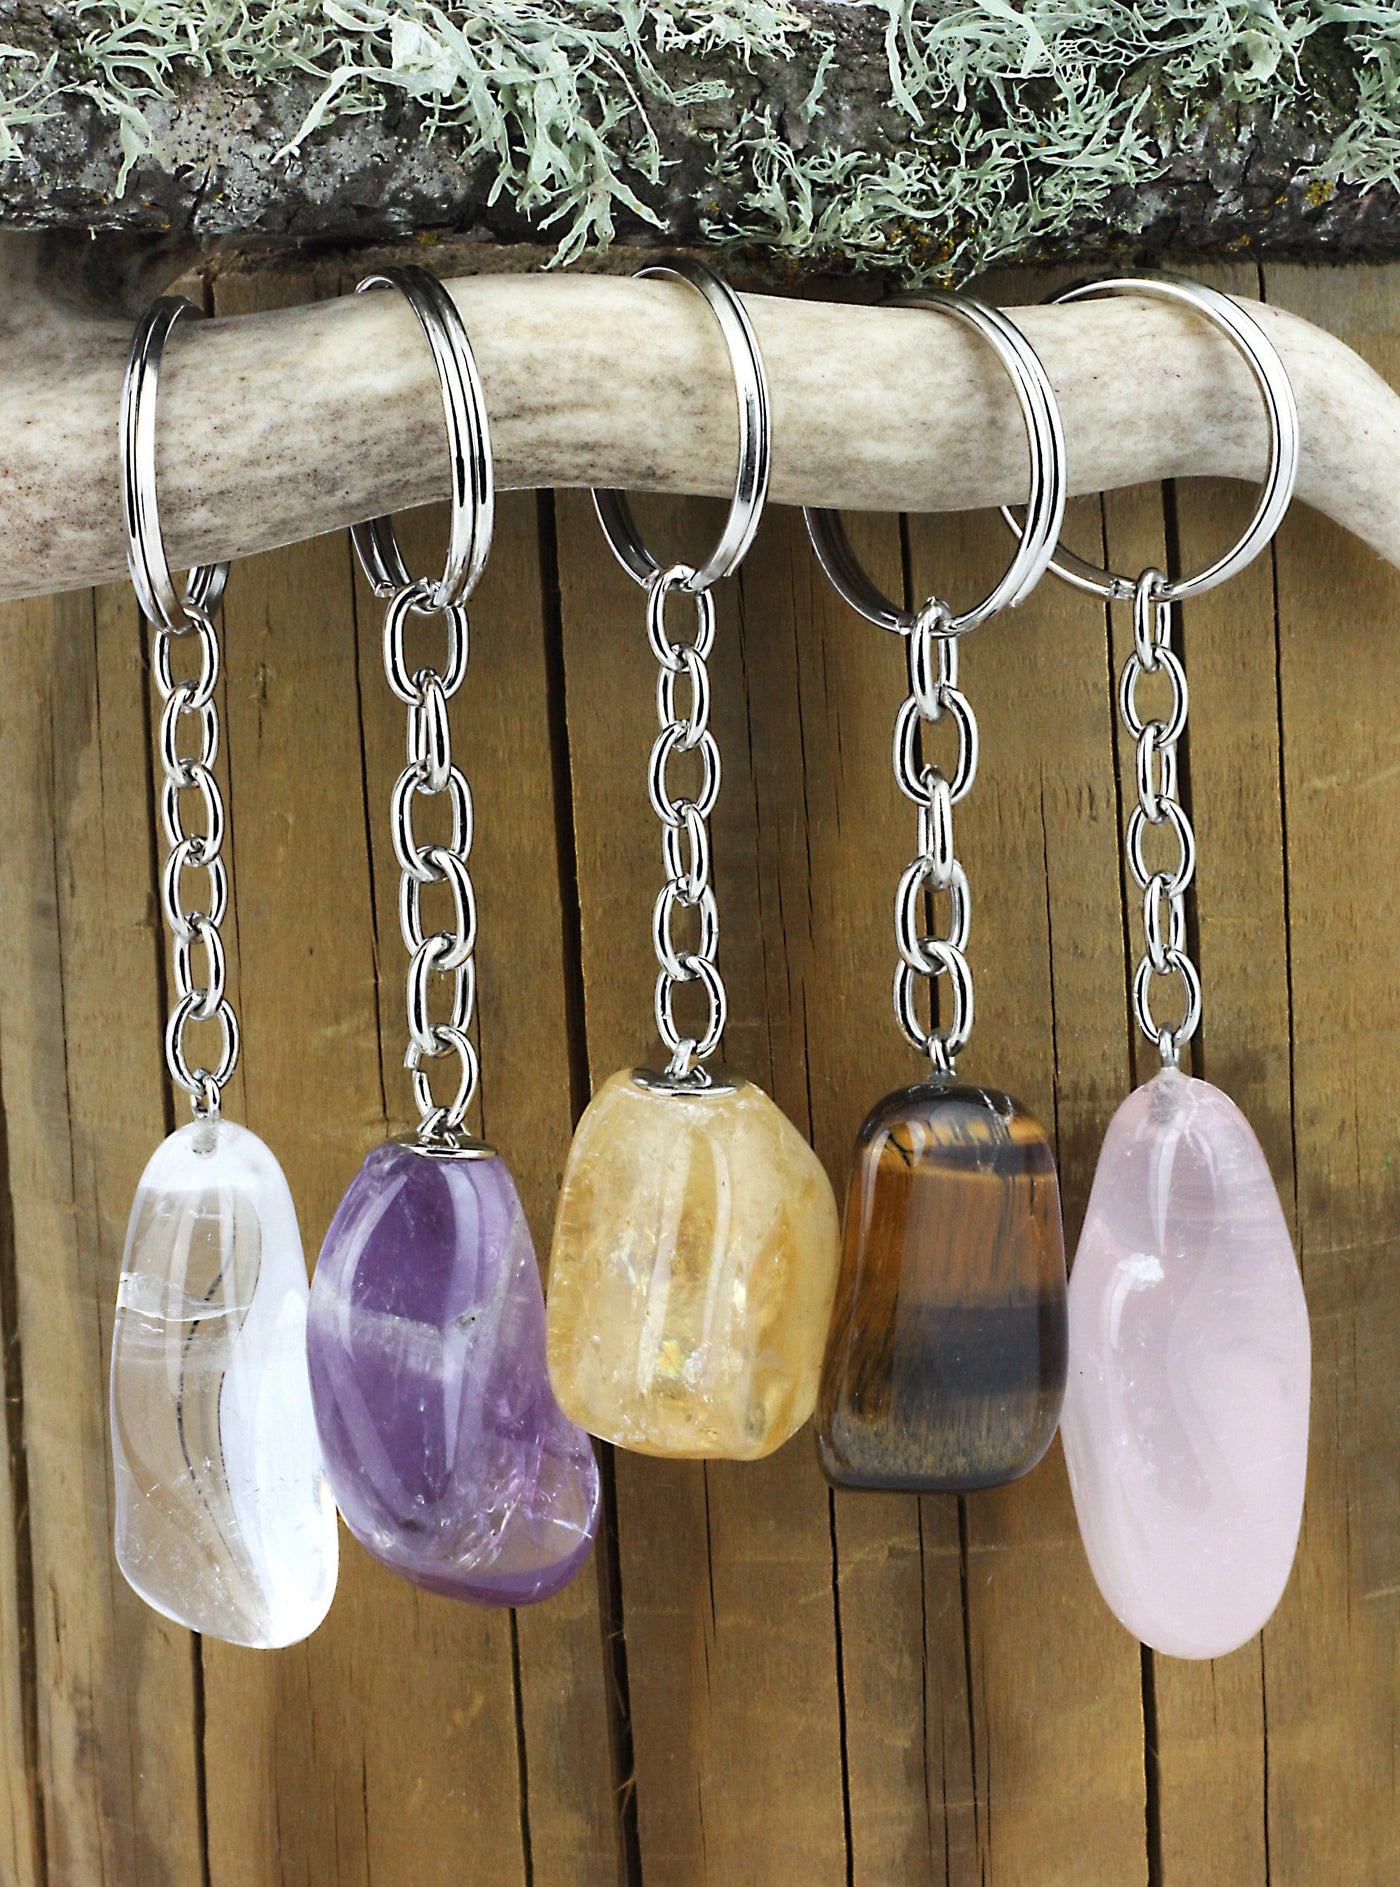 5 tumbled keychains hanging on a stick